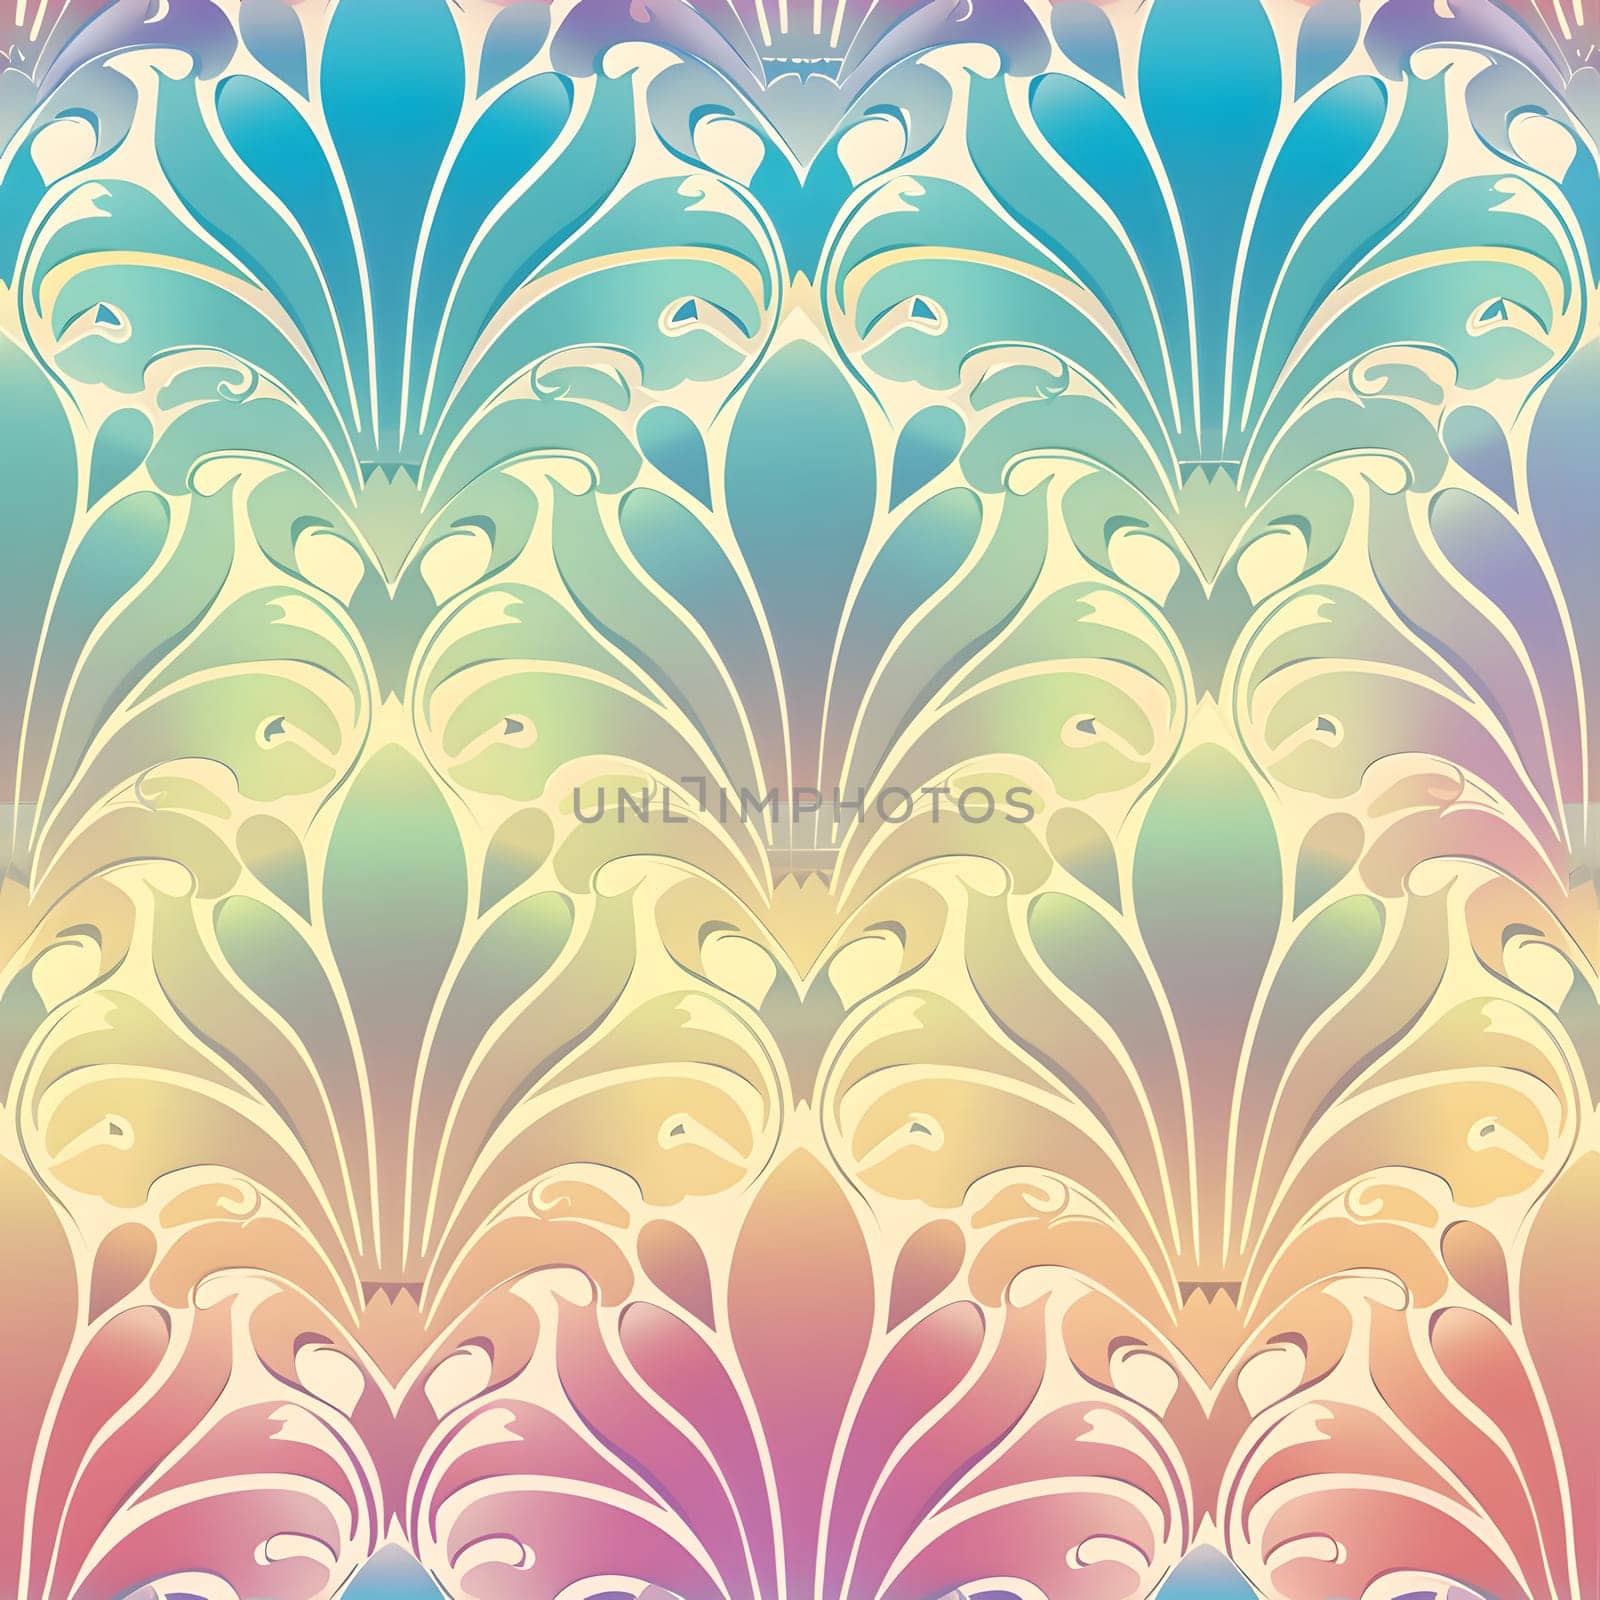 Seamless texture and background of Art Nouveau Colorful Brightness Colors Vibrant Pastel Power Gradient. Neural network generated image. Not based on any actual scene or pattern.